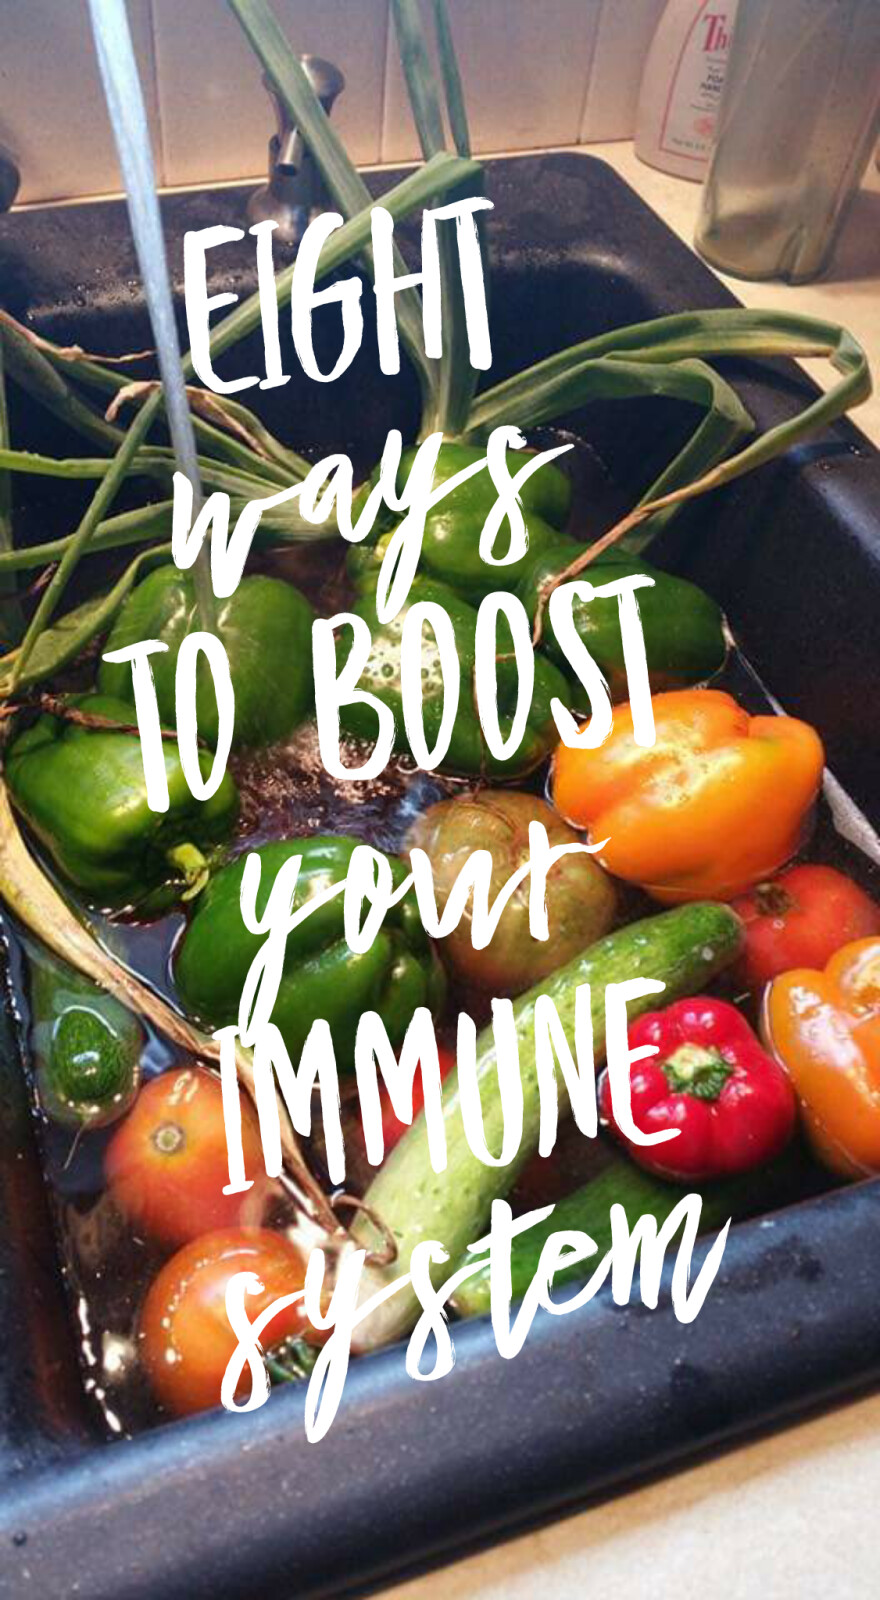 EIGHT WAYS TO BOOST YOUR IMMUNE SYSTEM